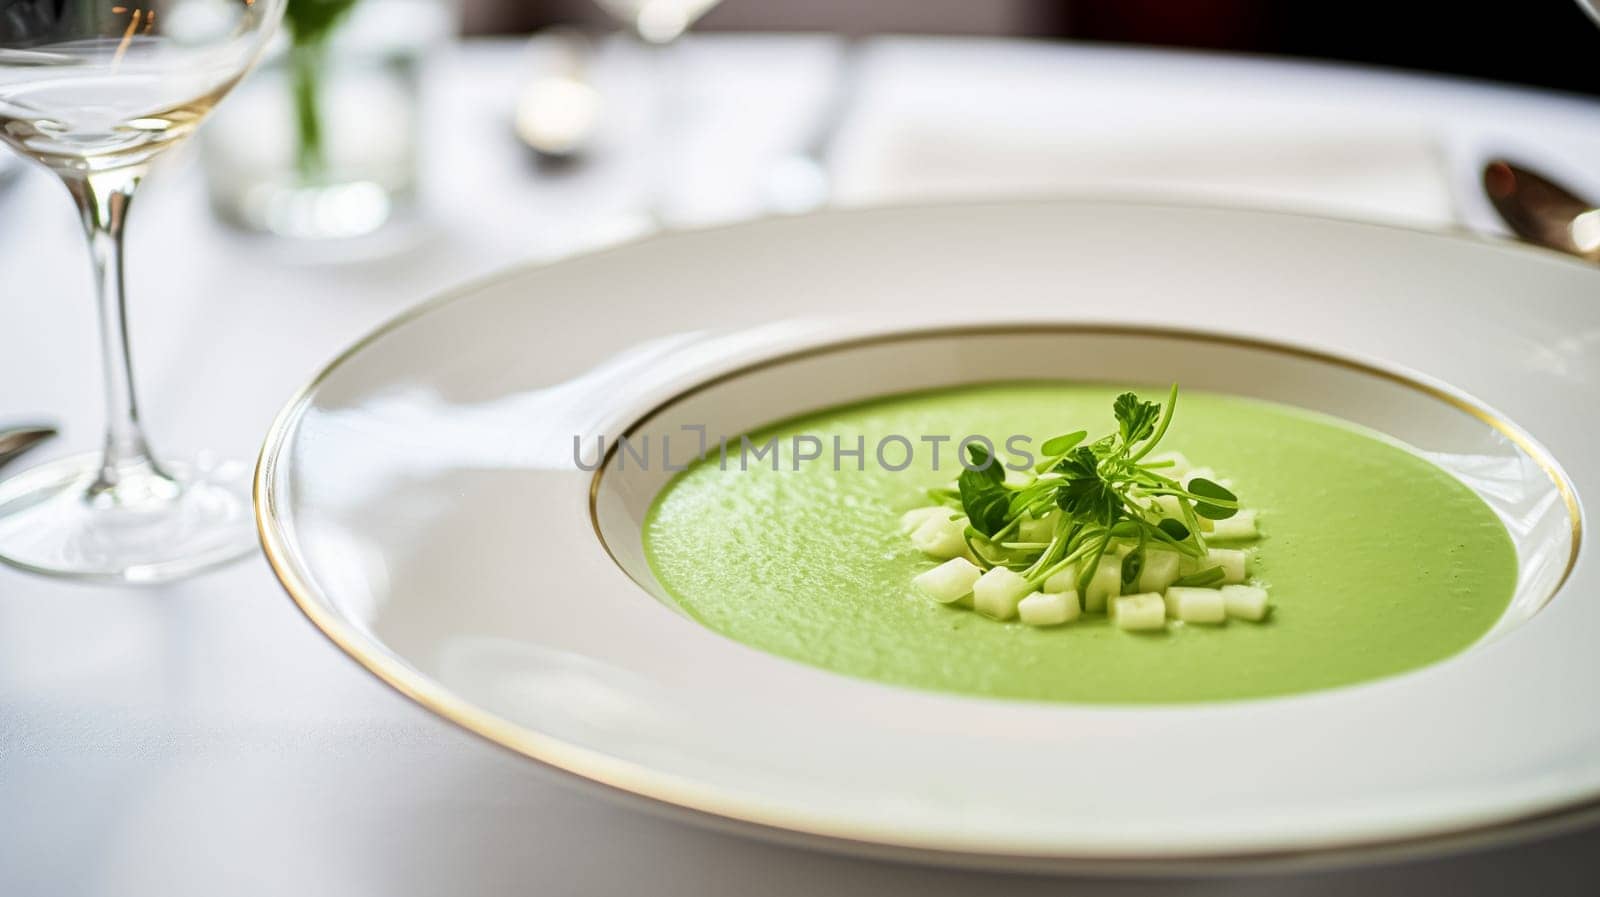 Pea cream soup in a restaurant, English countryside exquisite cuisine menu, culinary art food and fine dining by Anneleven